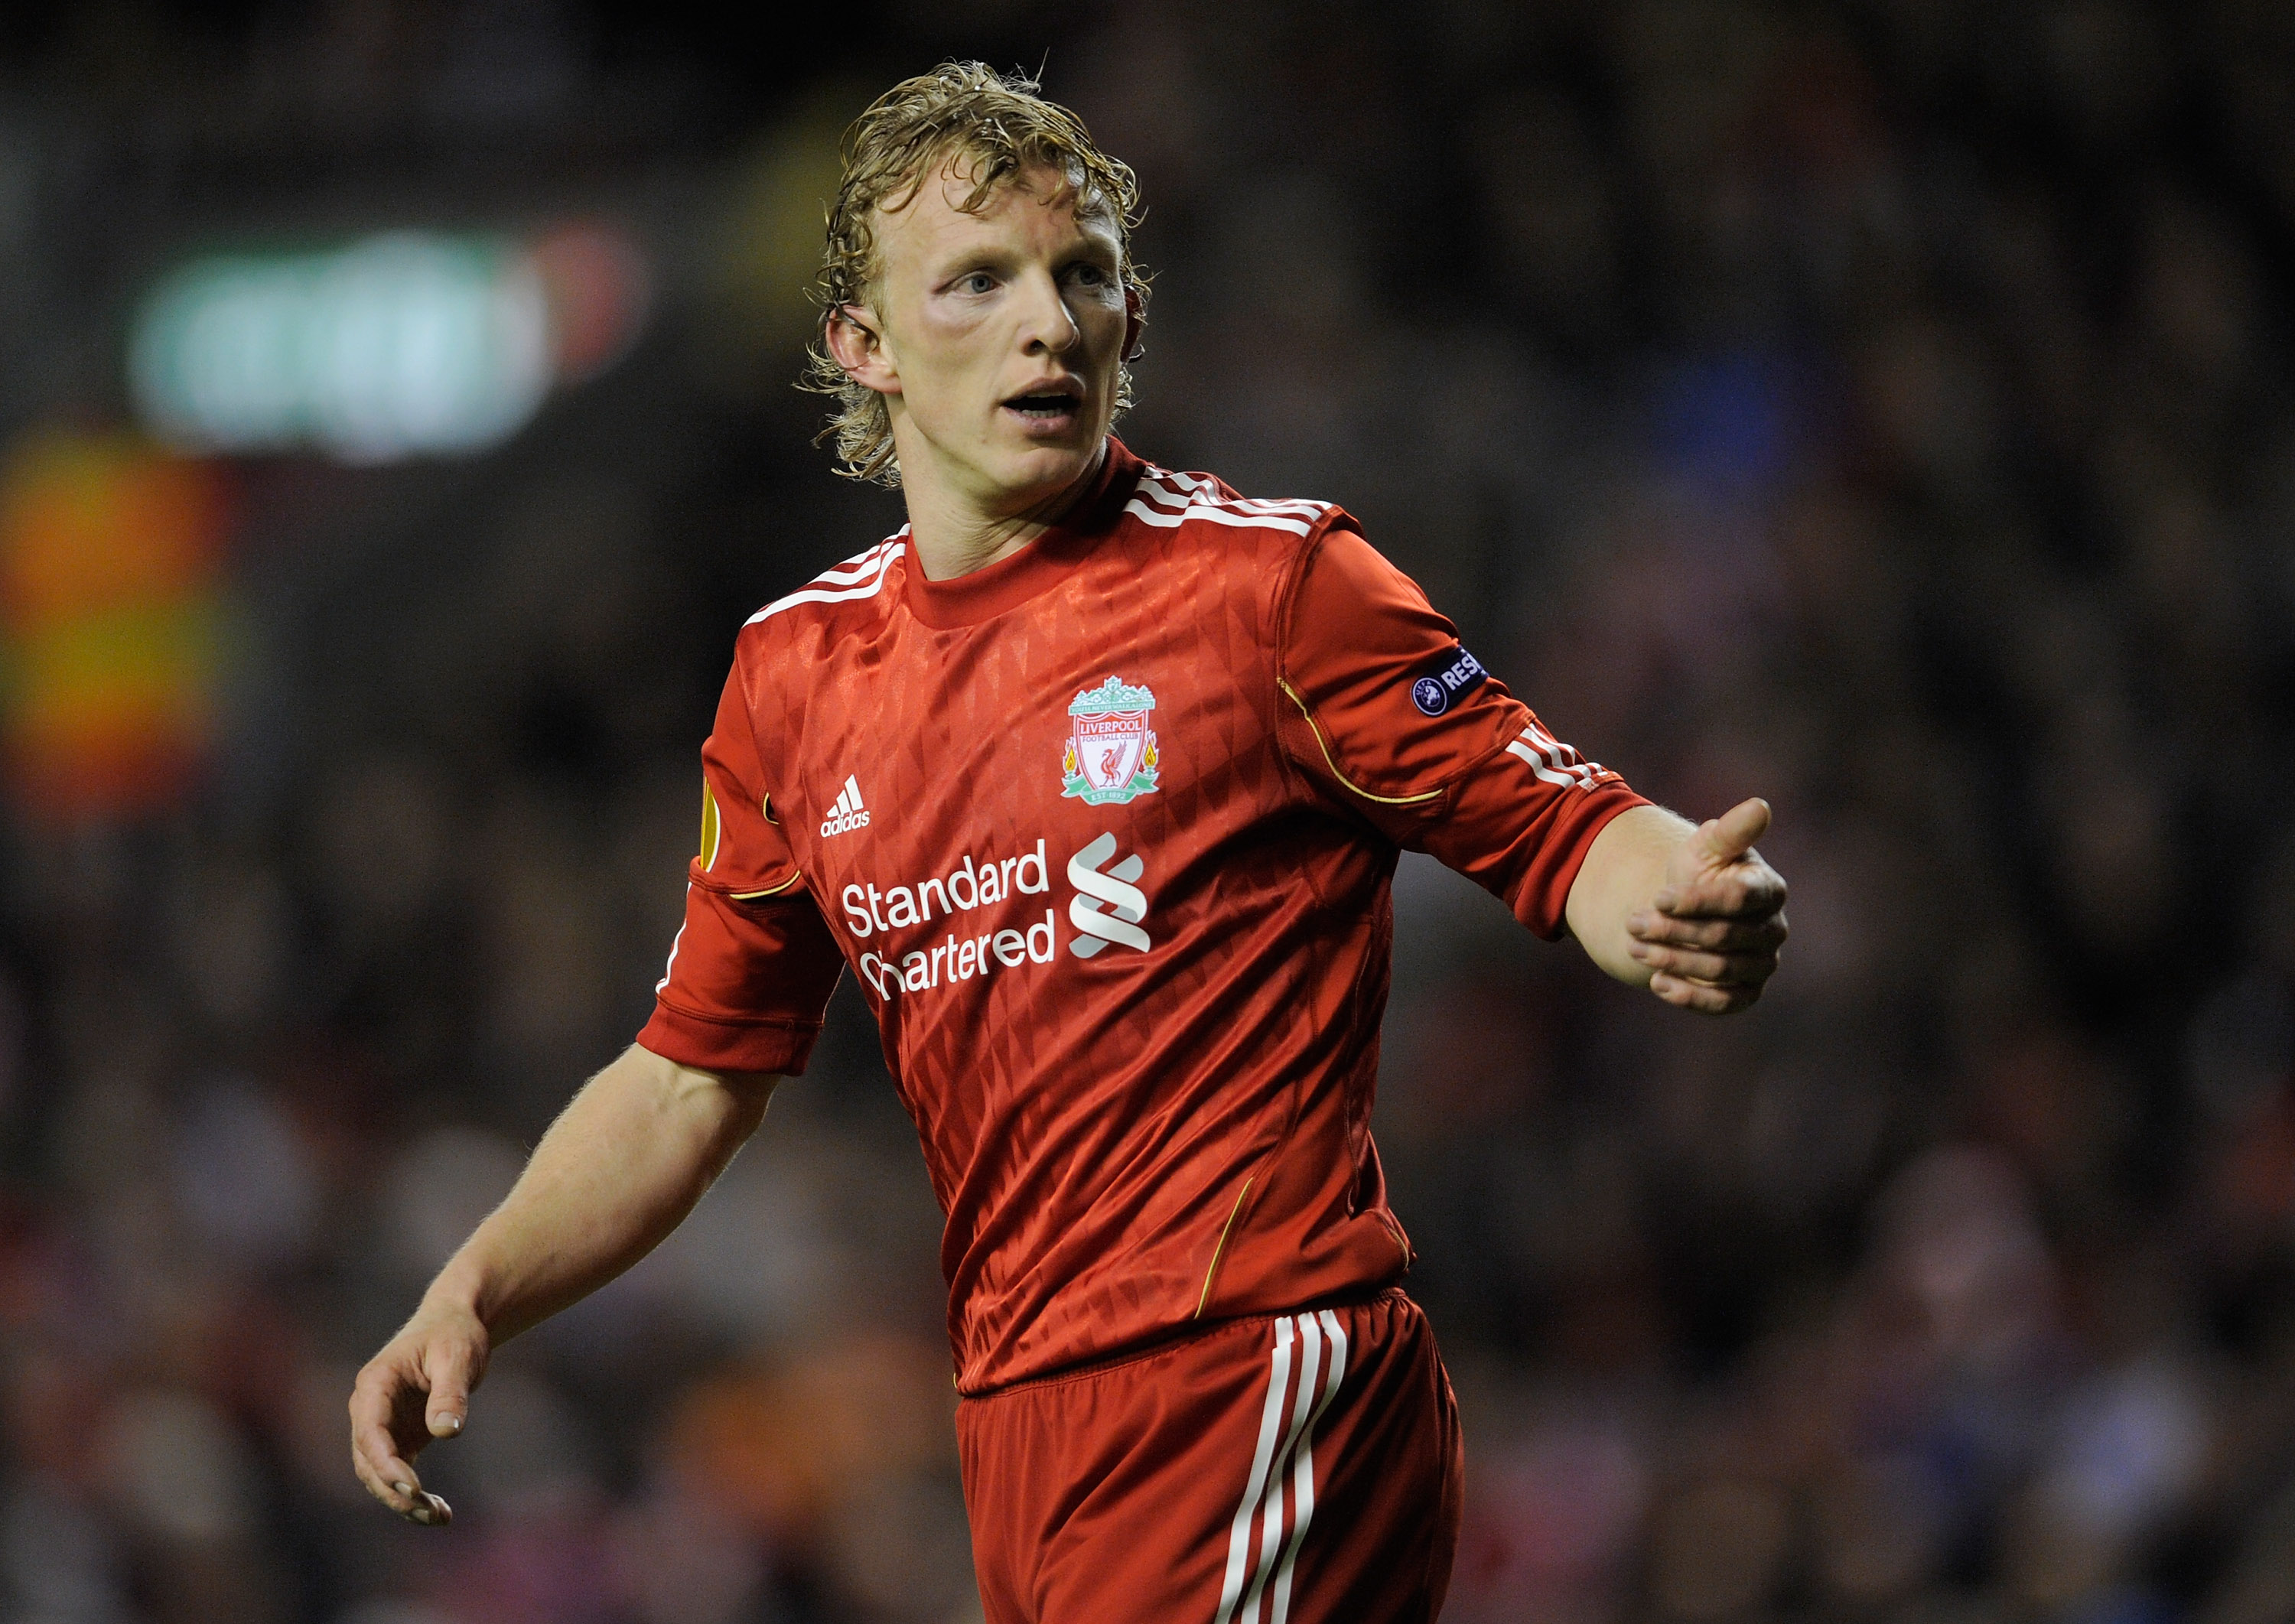 LIVERPOOL, ENGLAND - MARCH 17:  Dirk Kuyt of Liverpool reacts during the UEFA Europa League Round of 16 second leg match between Liverpool and SC Braga at Anfield on March 17, 2011 in Liverpool, England.  (Photo by Michael Regan/Getty Images)